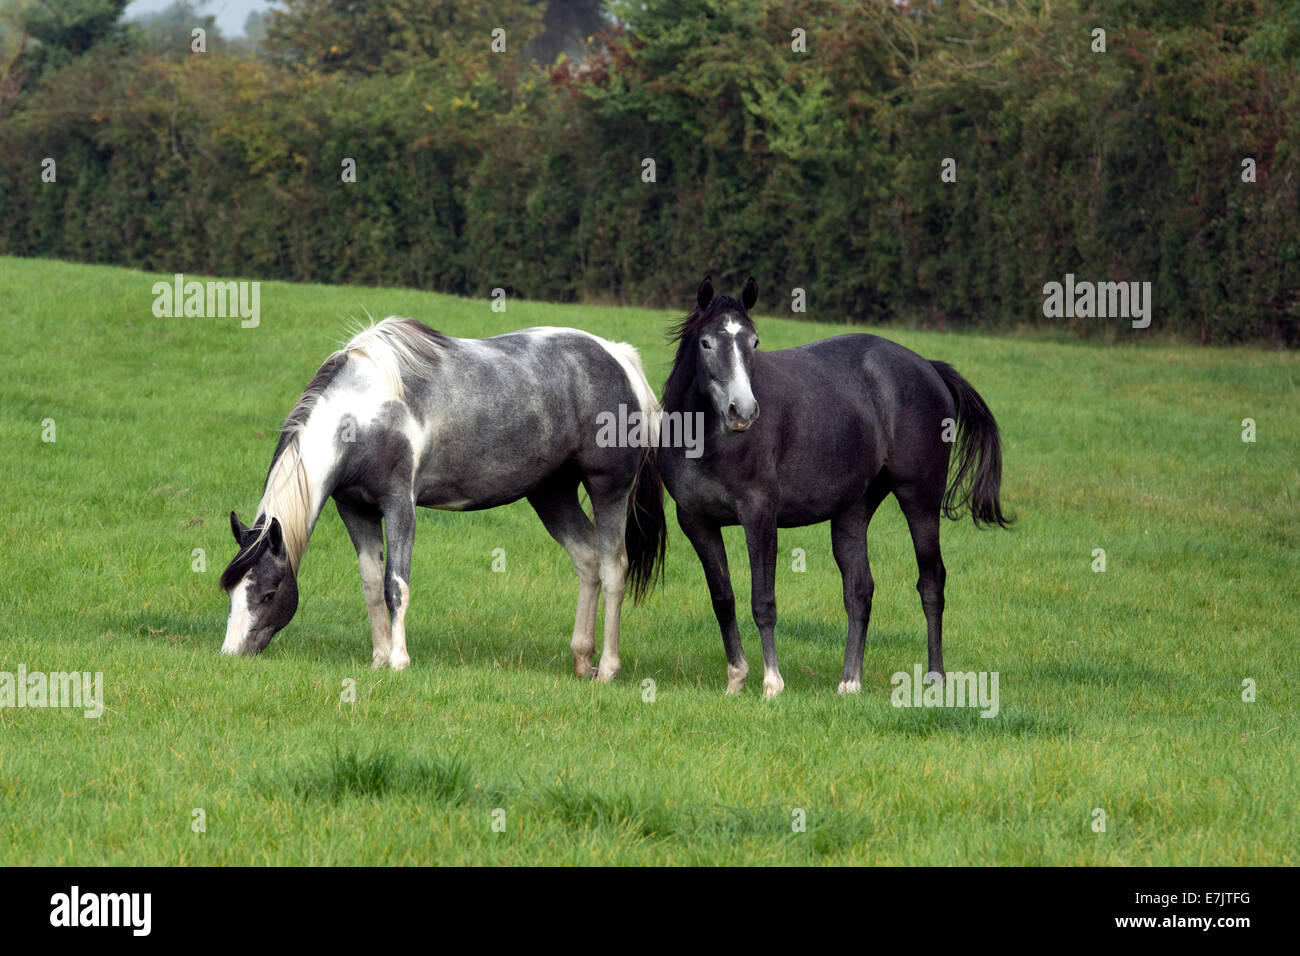 A skewbald and a grey horse in a field, Warwickshire, UK Stock Photo